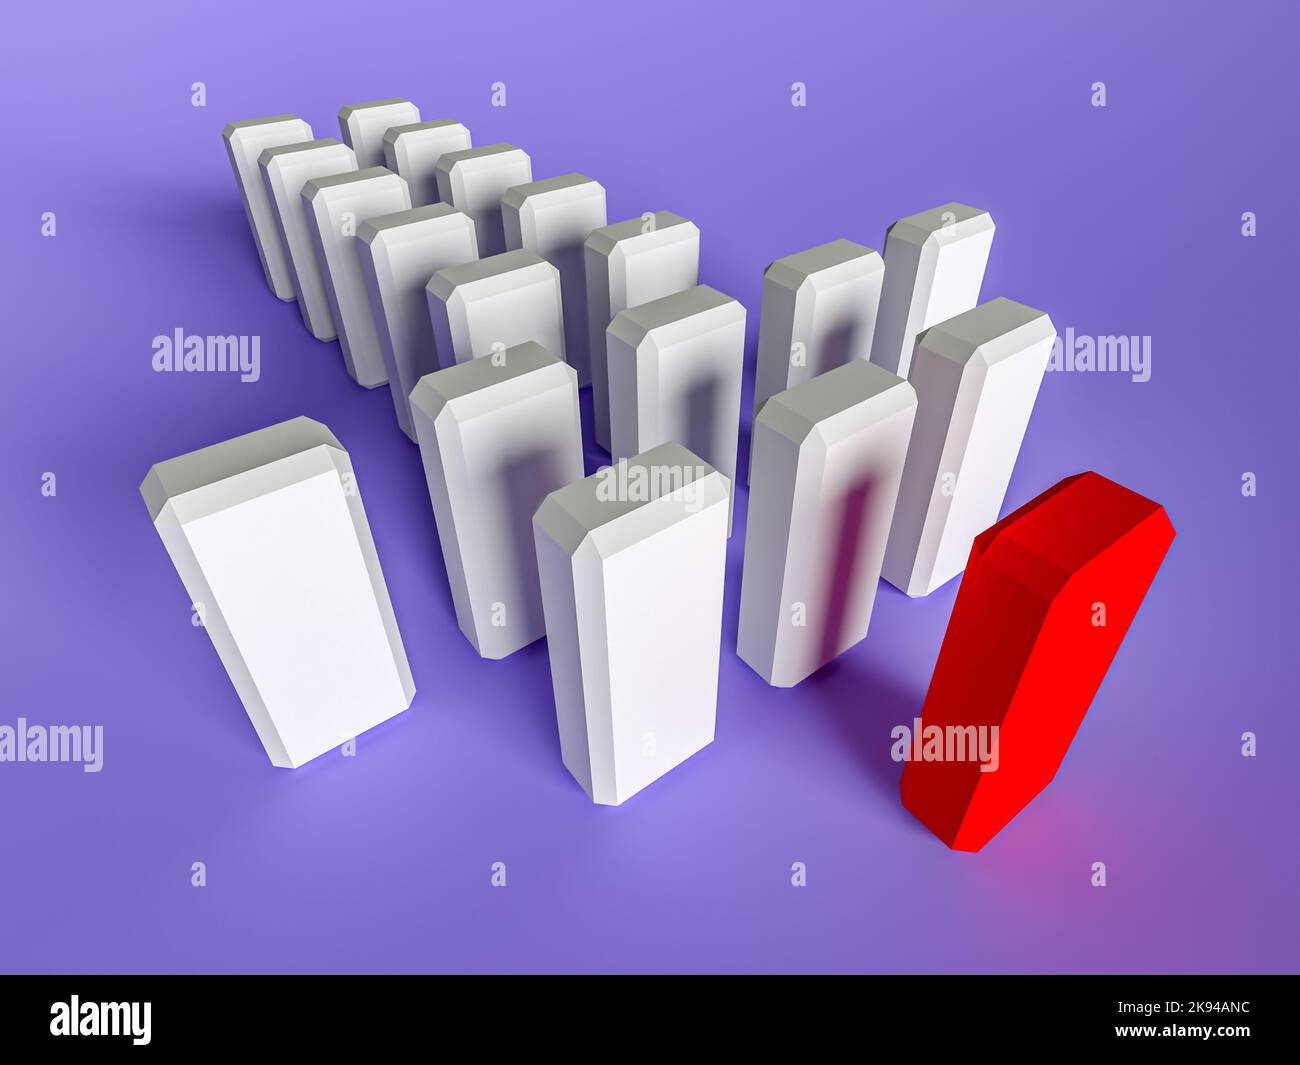 Illustration of leader leads the team forward. Business concepts. 3d rendering Stock Photo